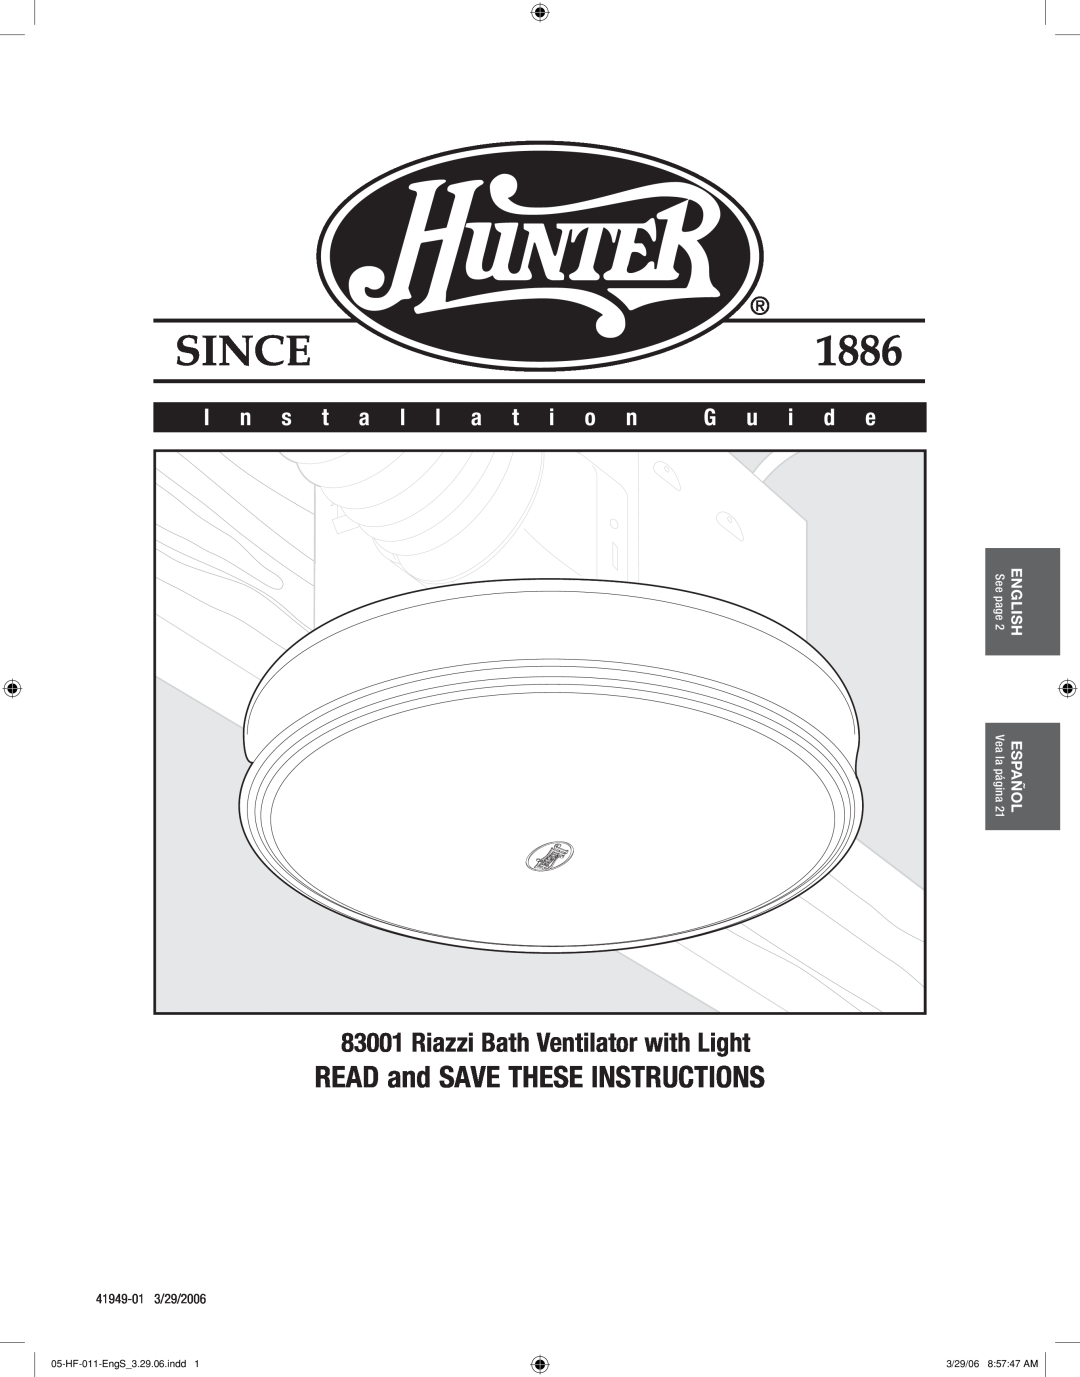 Hunter Fan 83001 manual READ and SAVE THESE INSTRUCTIONS, Riazzi Bath Ventilator with Light, I n s t a l l a t i o n 